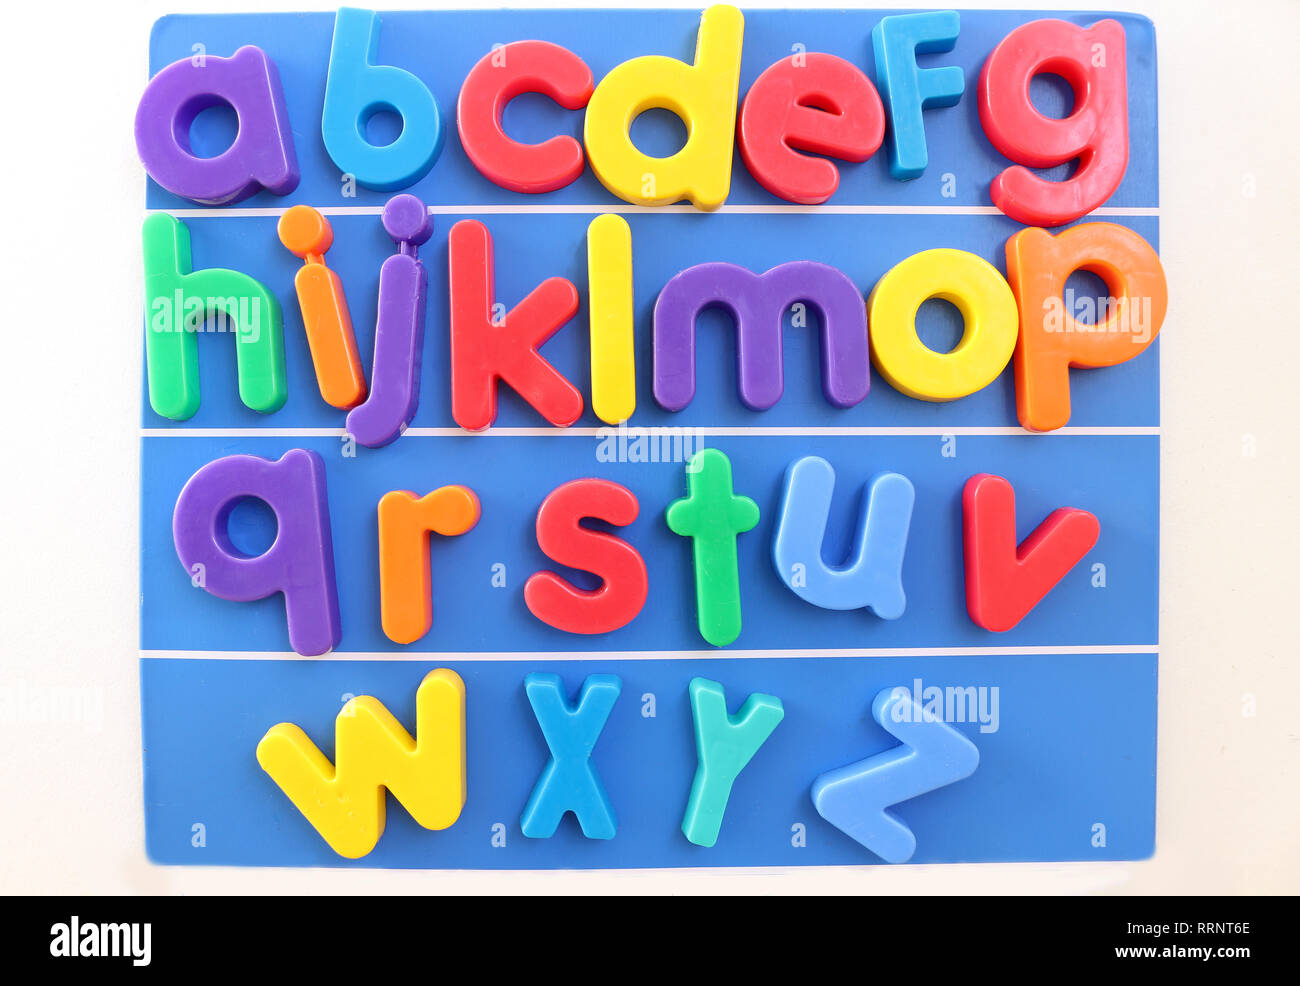 Colorful Magnetic Plastic Alphabet Letters In Alphabetical Order Stock Photo Alamy